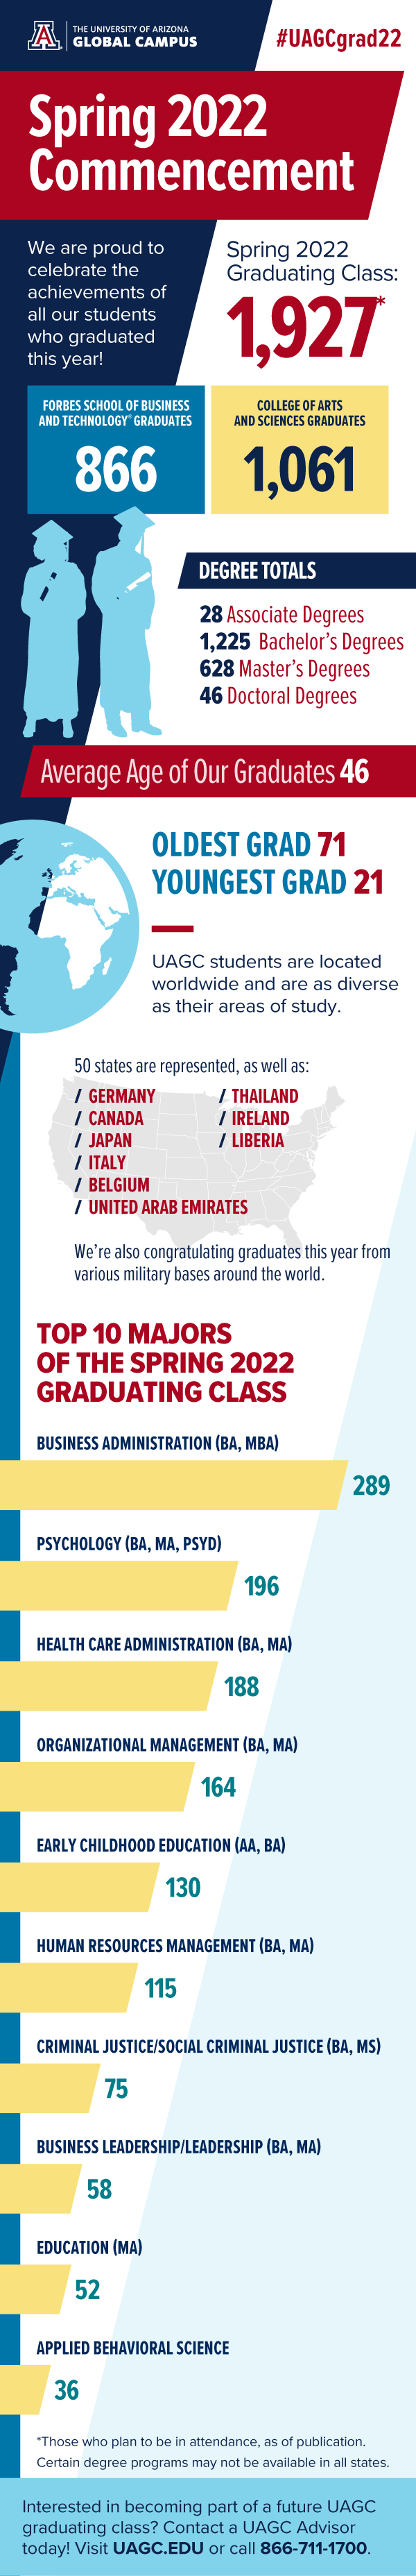 UAGC Spring 2022 Commencement by the Numbers Infographic